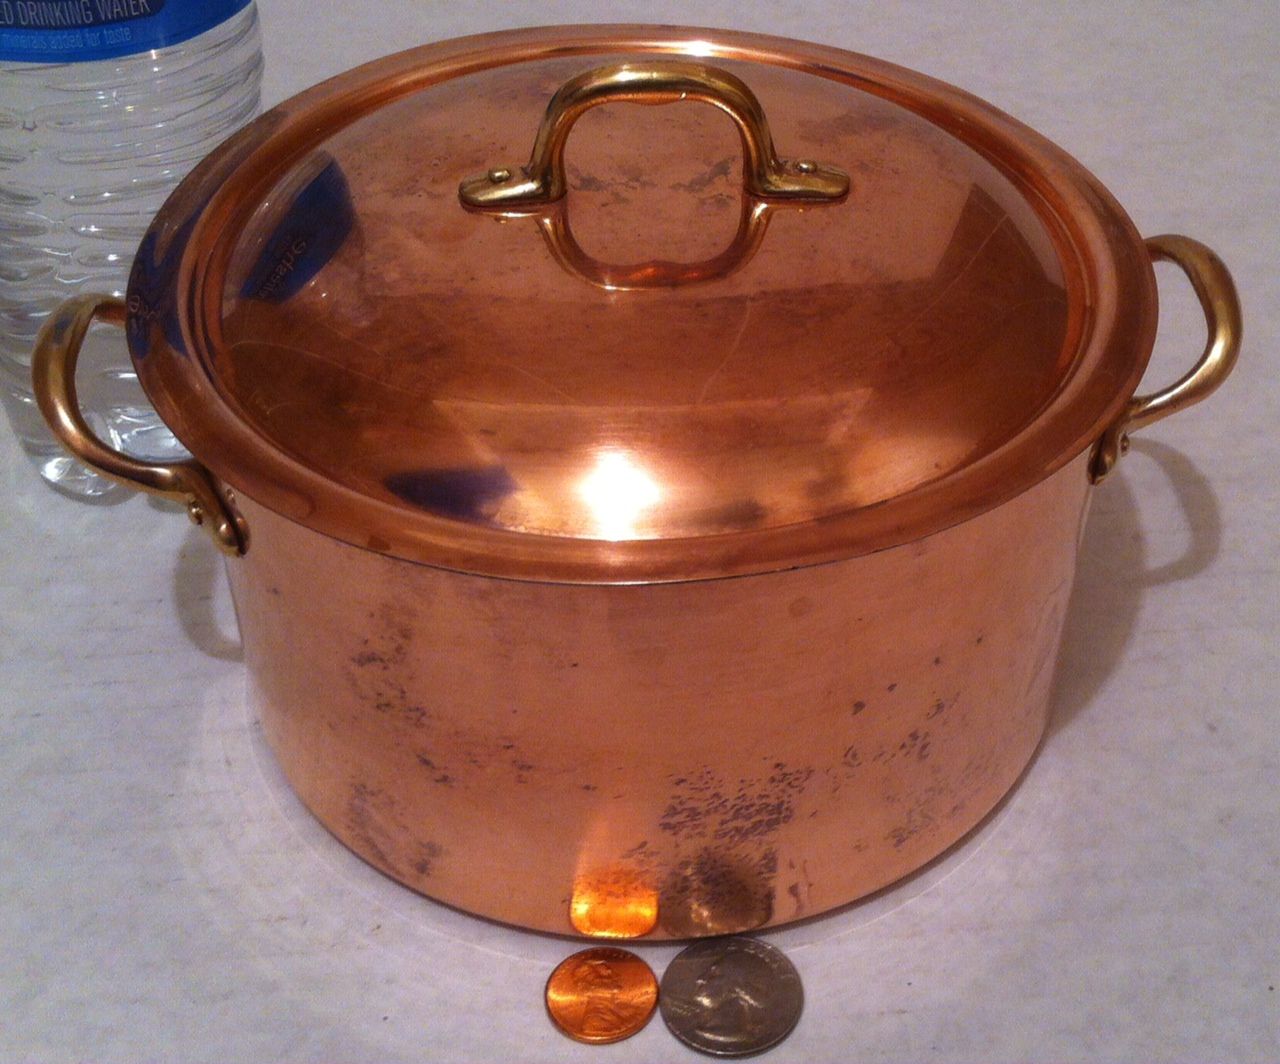 Vintage Metal Copper and Brass Pot with Lid, Made in Italy, 6" x 3 1/2" Wide, Kitchen Decor, Hanging Decor, Shelf Display, This Can Be Shined Up